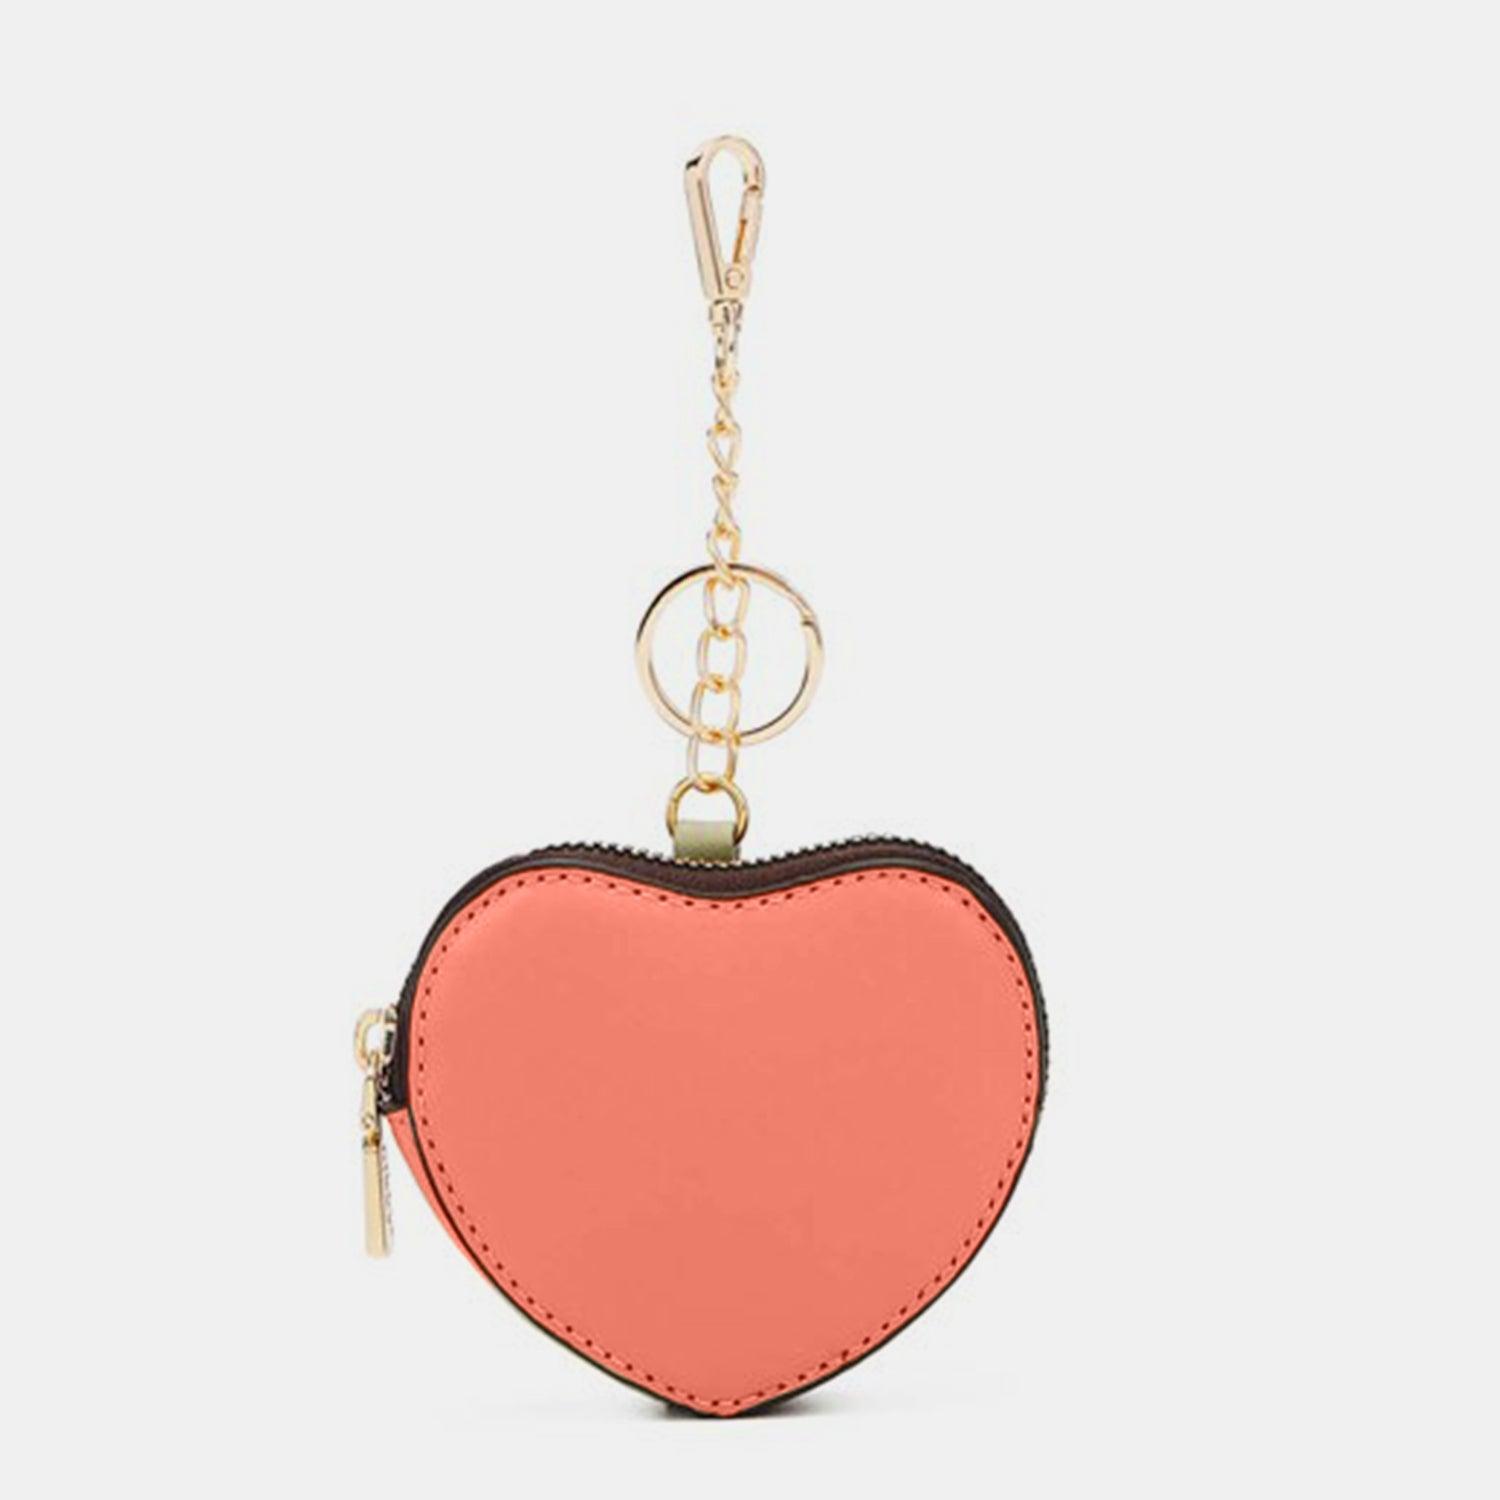 a heart shaped keychain with a chain hanging from it